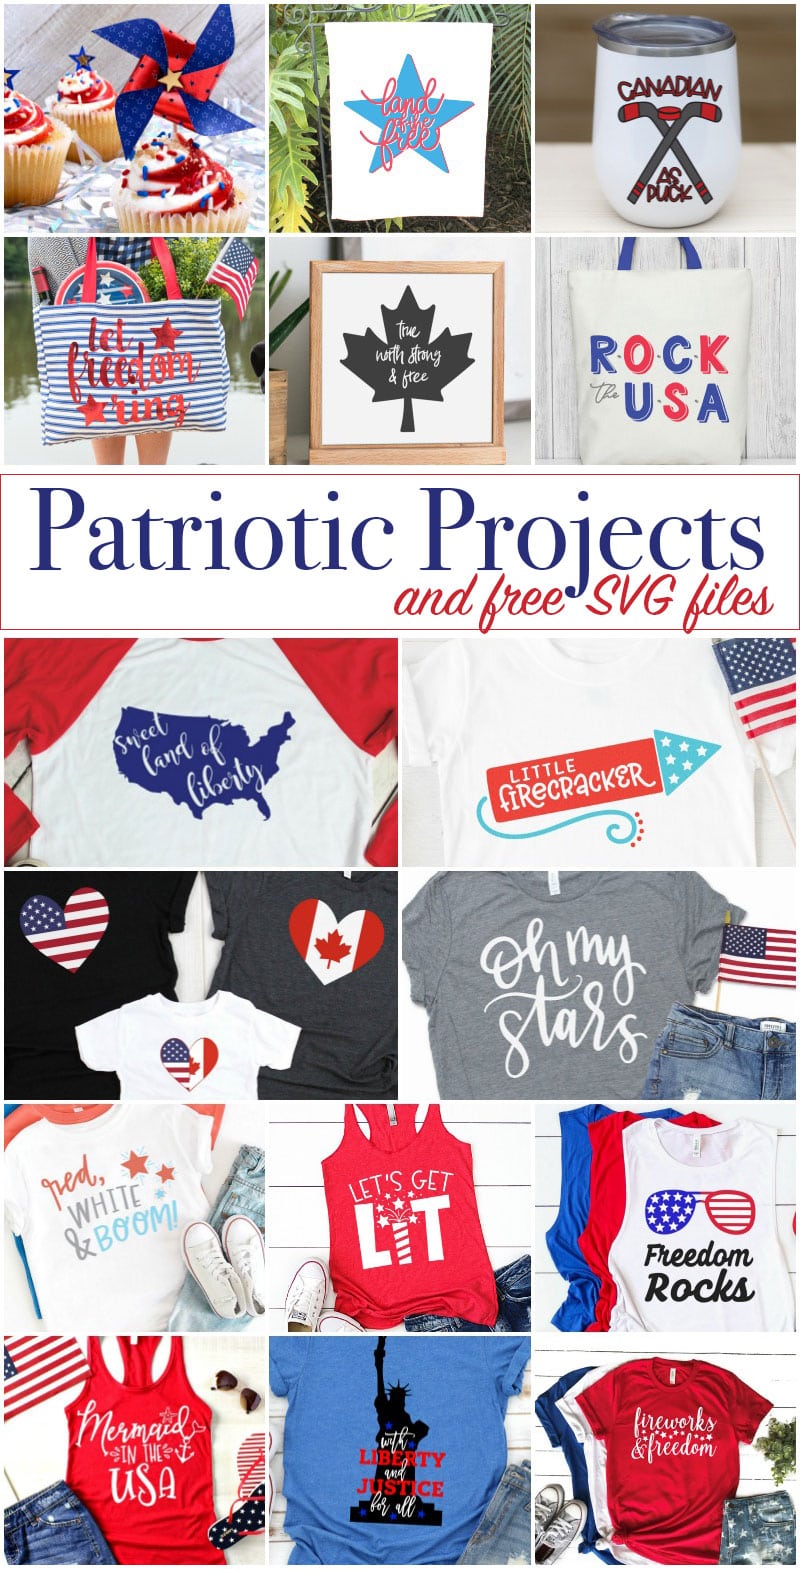 Patriotic projects and SVG files